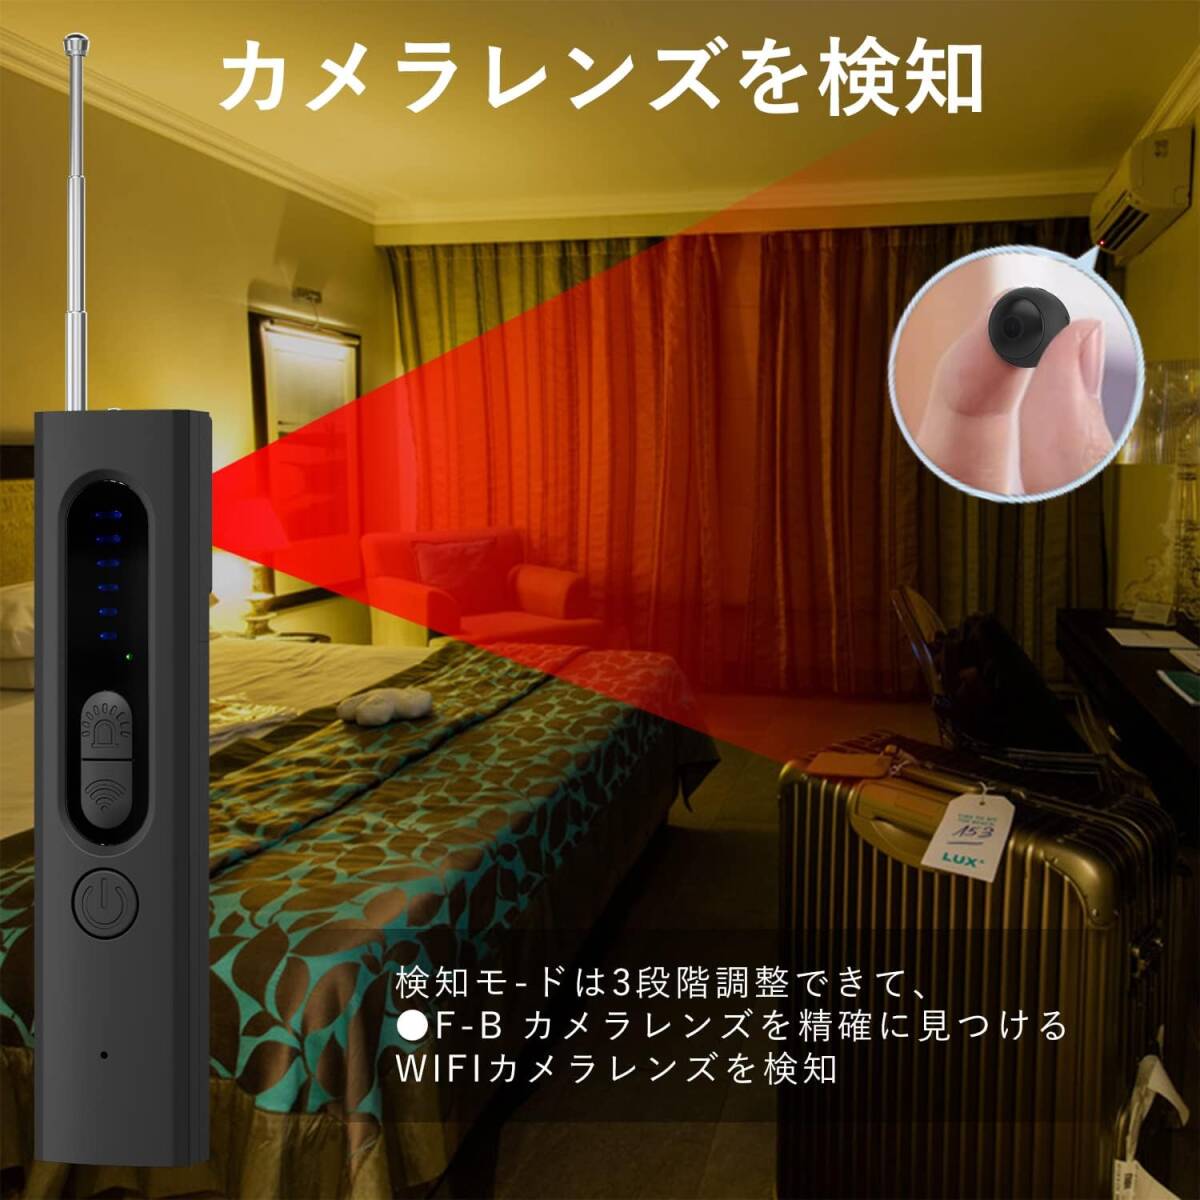  microminiature camera .. camera interception .. detector .. camera discovery vessel infra-red rays GPS pursuit discovery vessel signal detector interception detection pen .. for goods crime prevention goods 